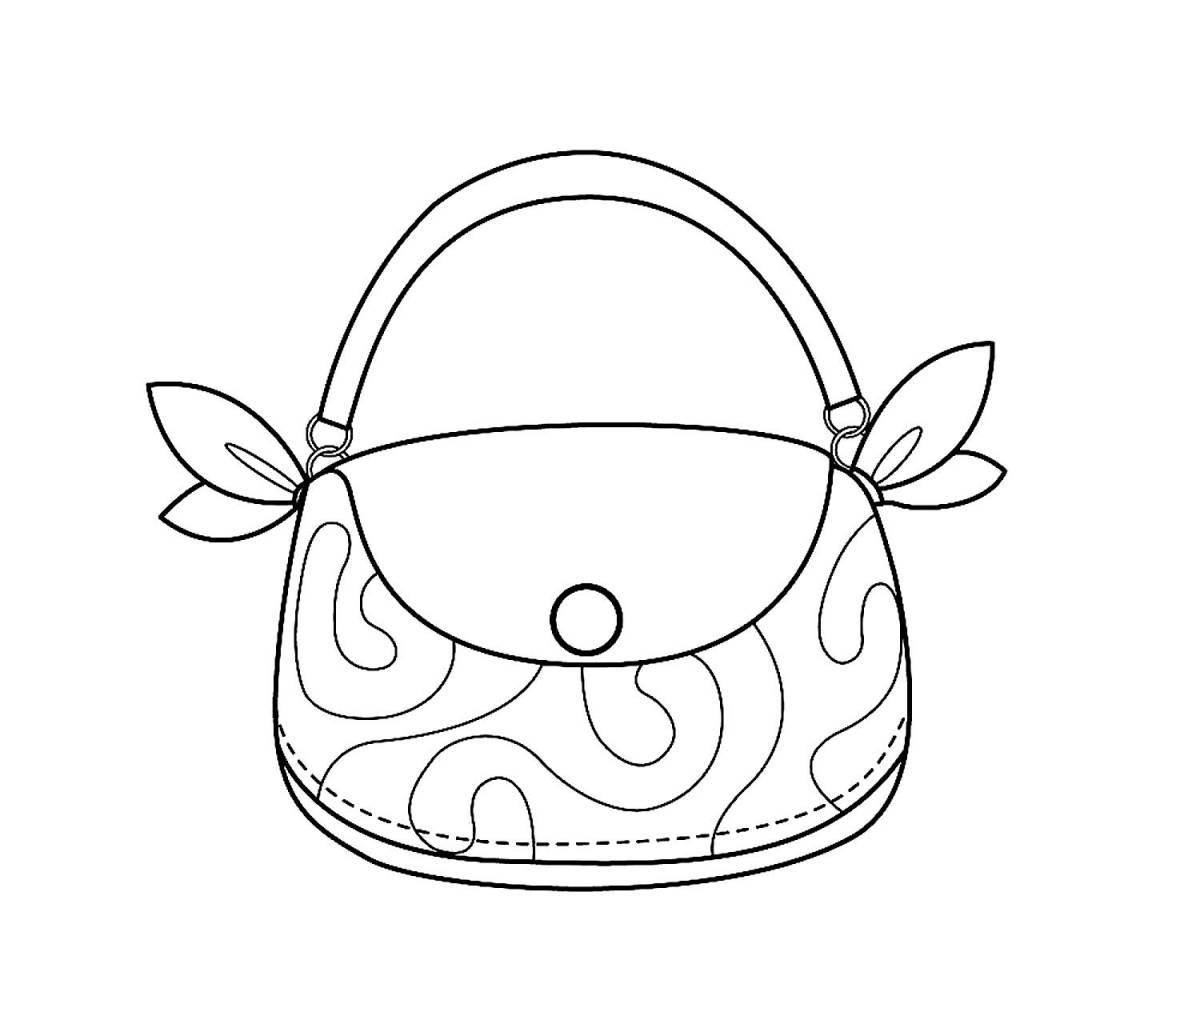 Adorable accessories for girls coloring book